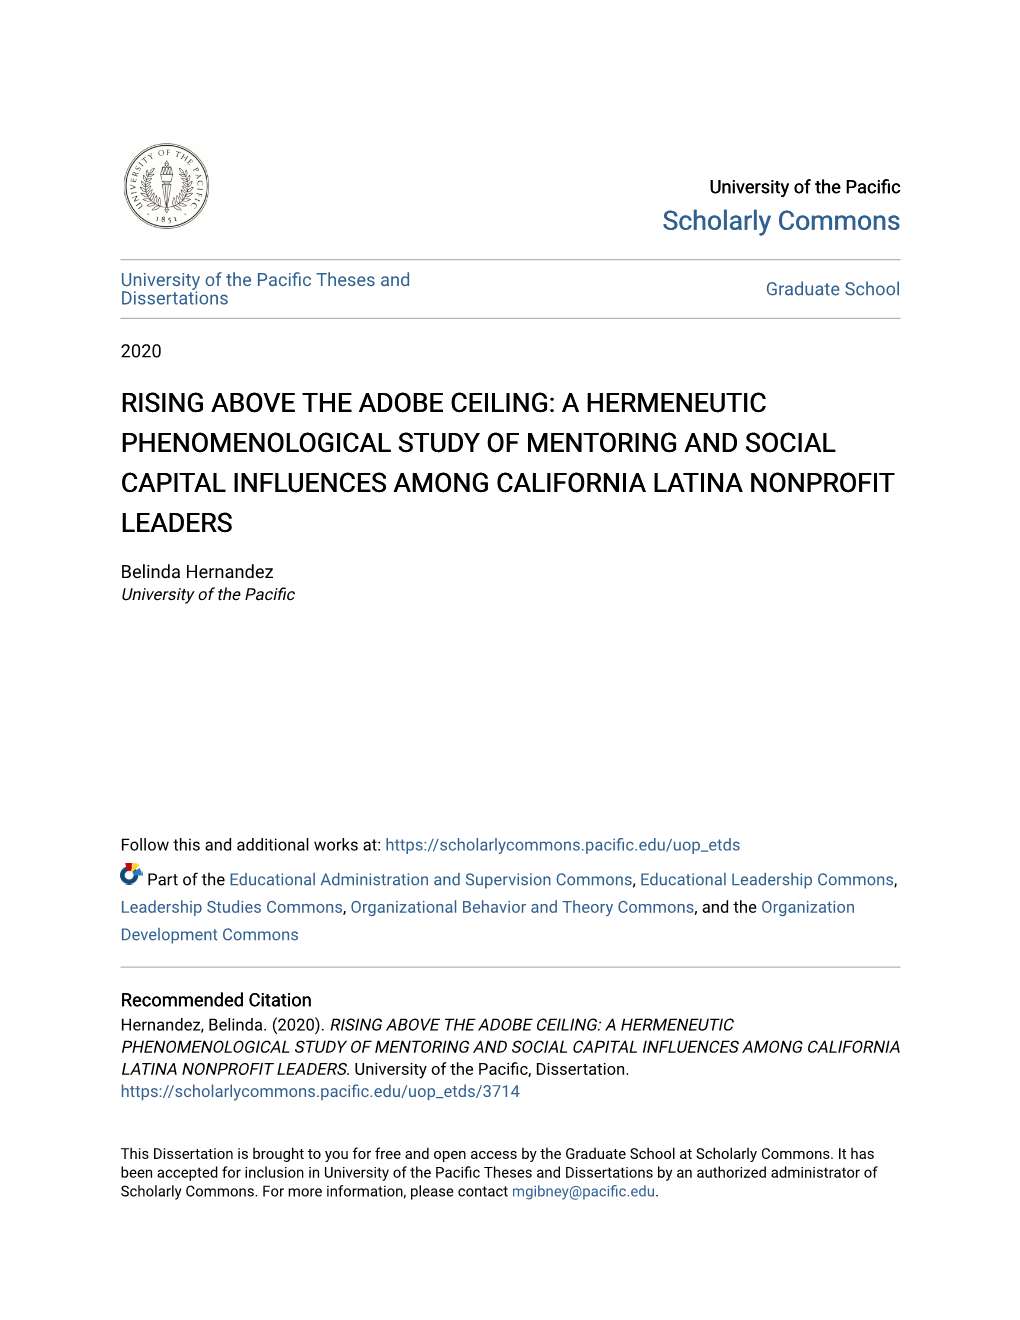 Rising Above the Adobe Ceiling: a Hermeneutic Phenomenological Study of Mentoring and Social Capital Influences Among California Latina Nonprofit Leaders